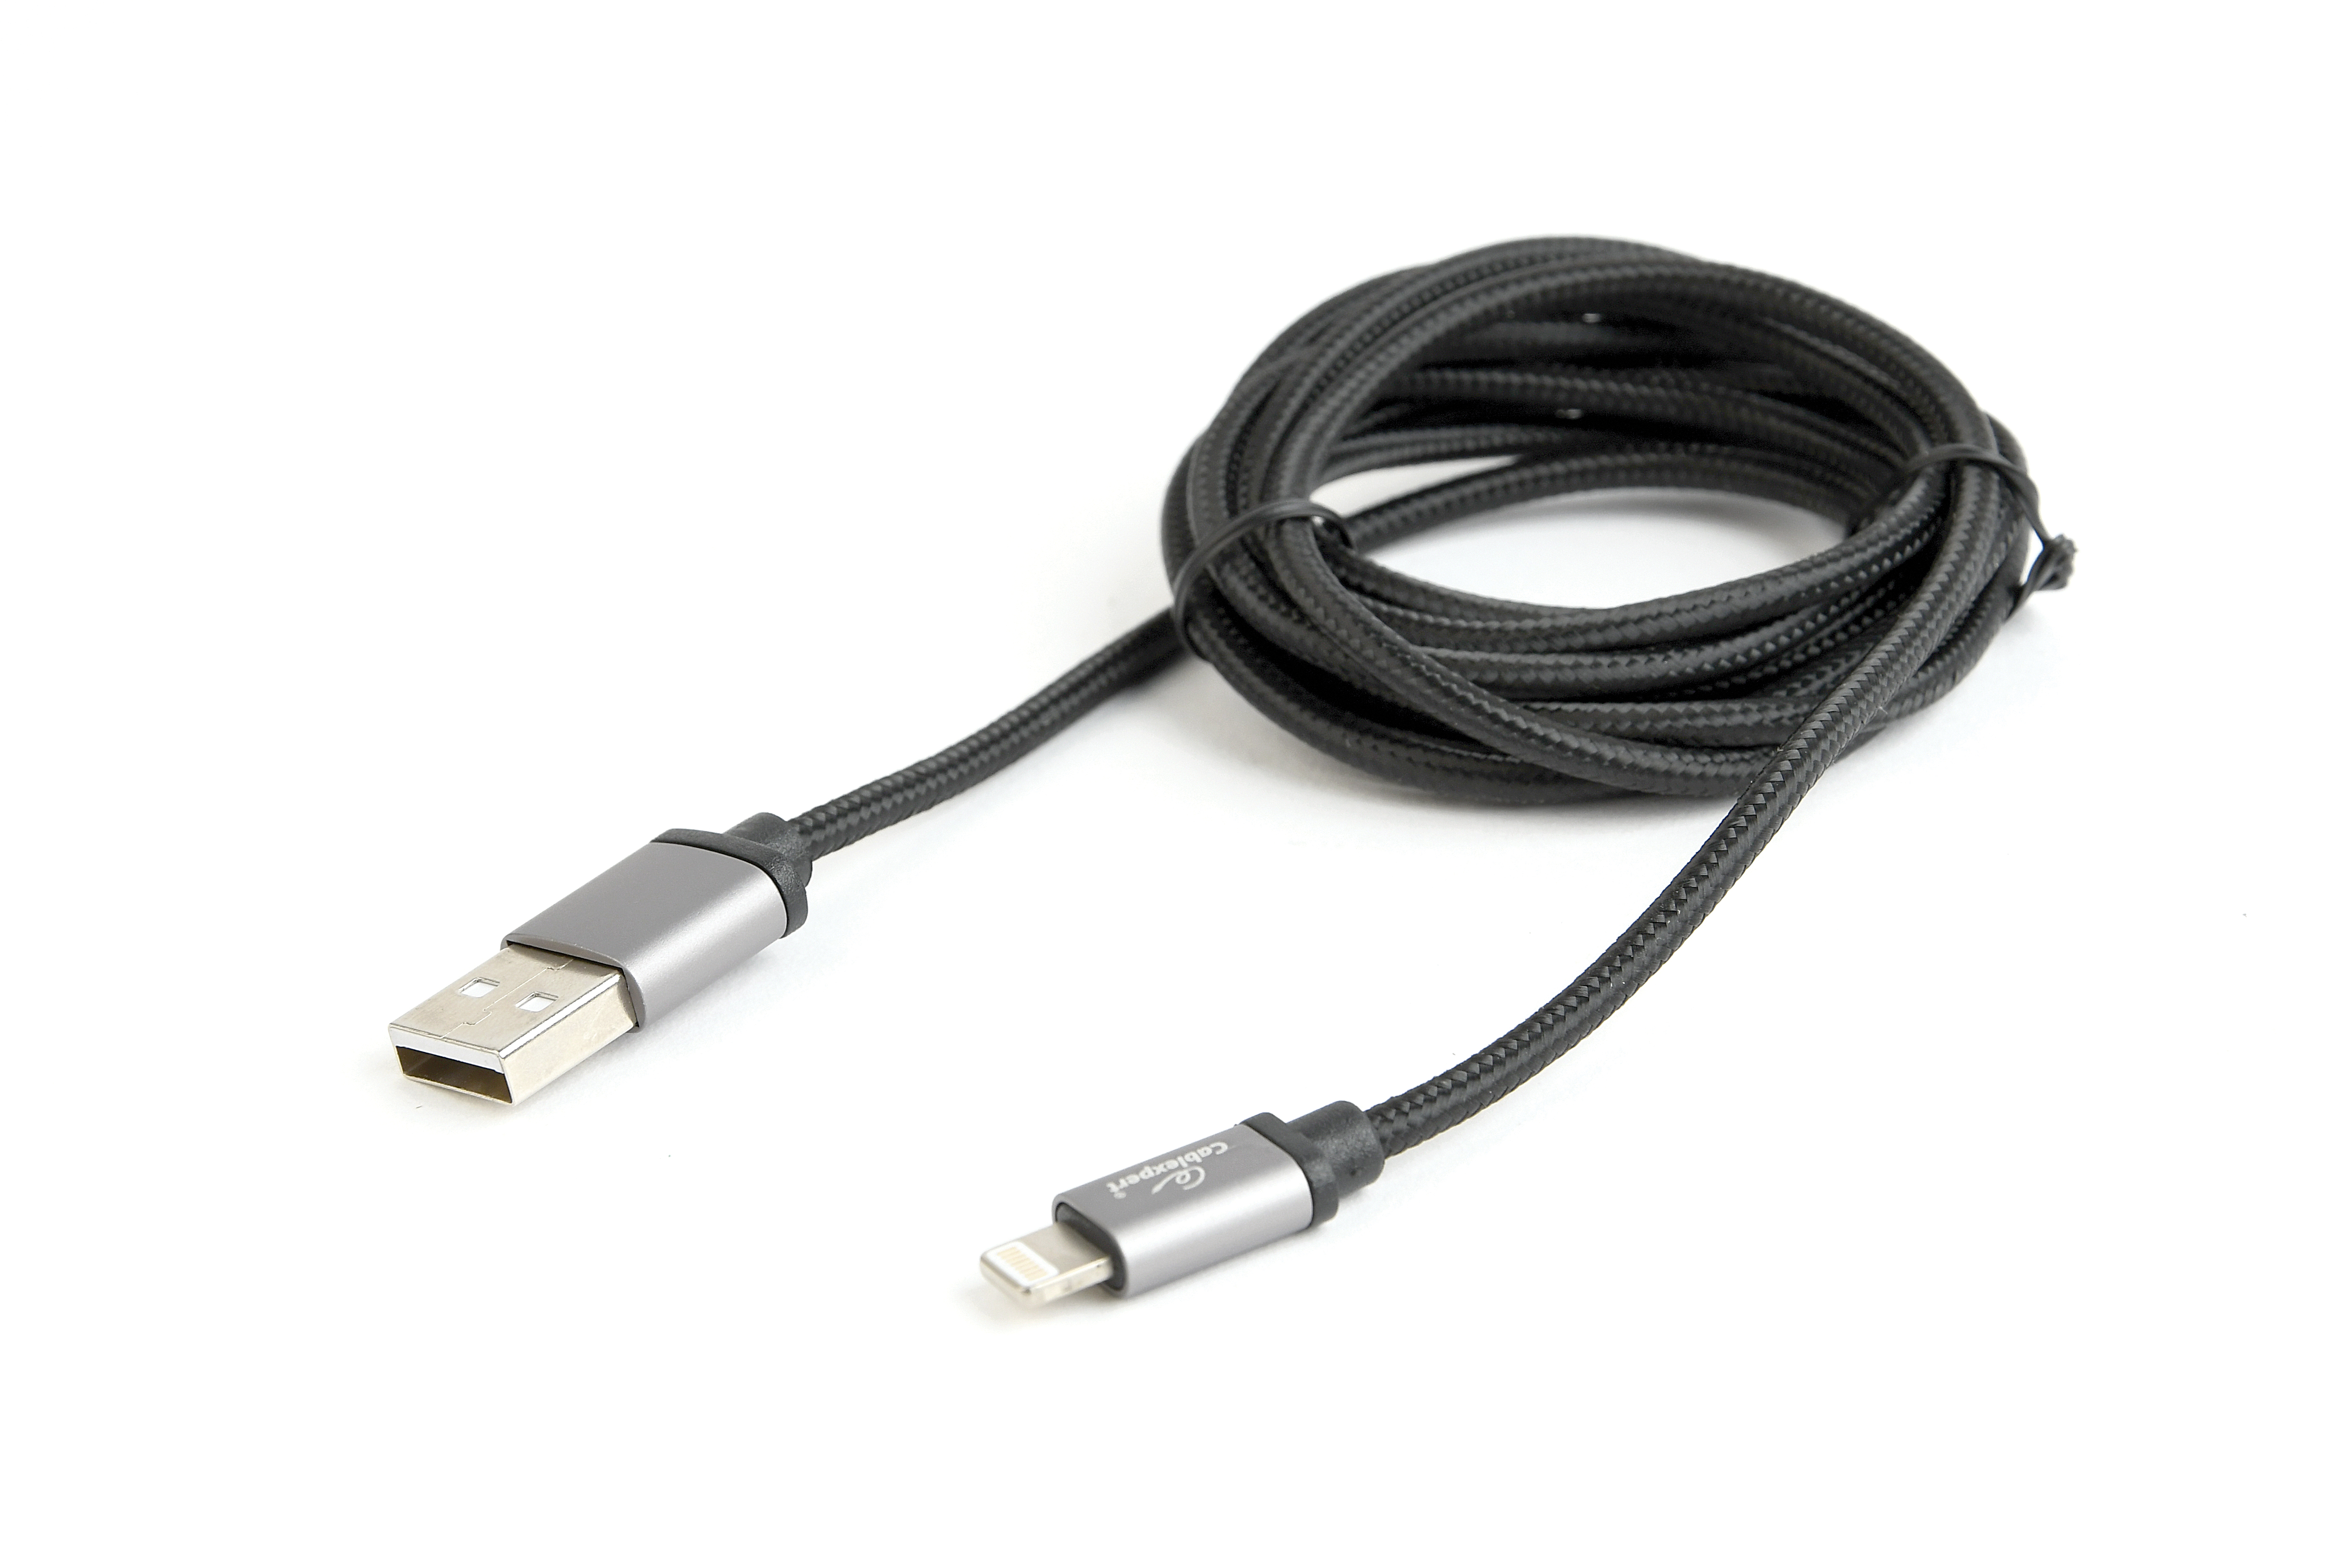 CABLEXPERT 8 PIN  CABLE BLACK 1,8M